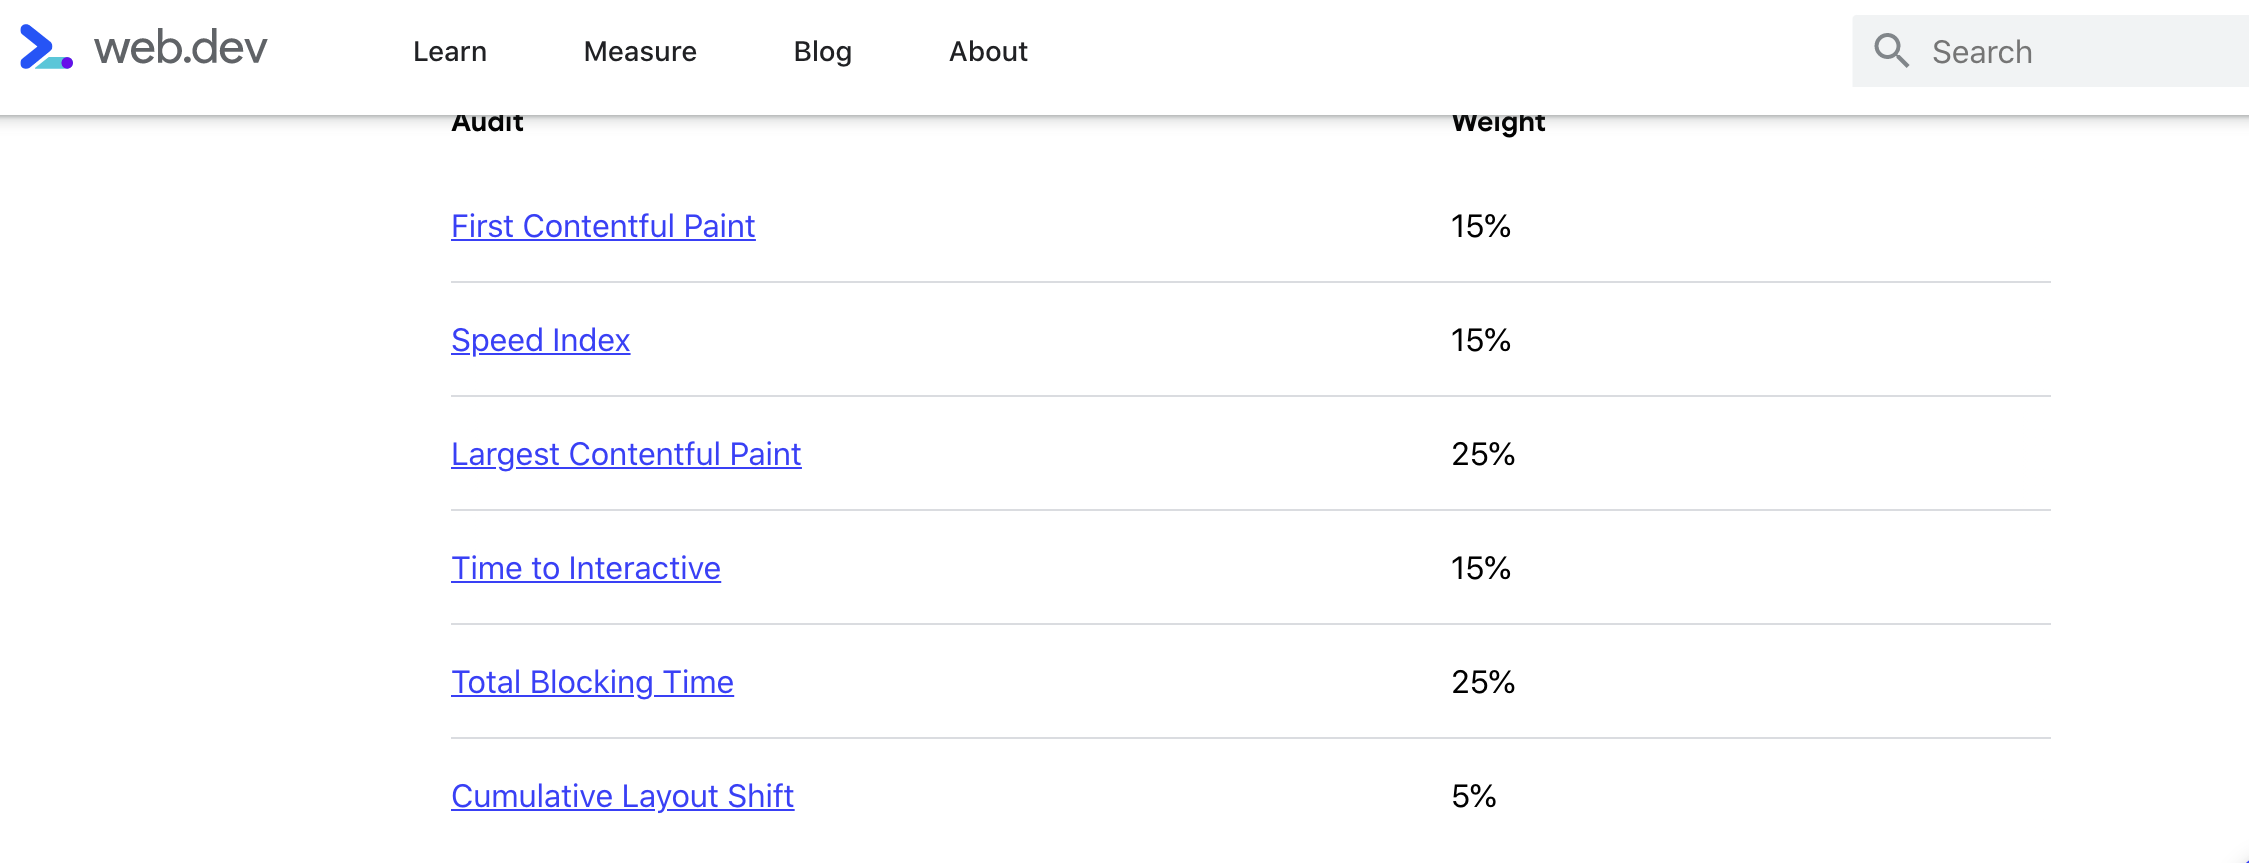 Importance of Core Web Vitals in Search Rankings